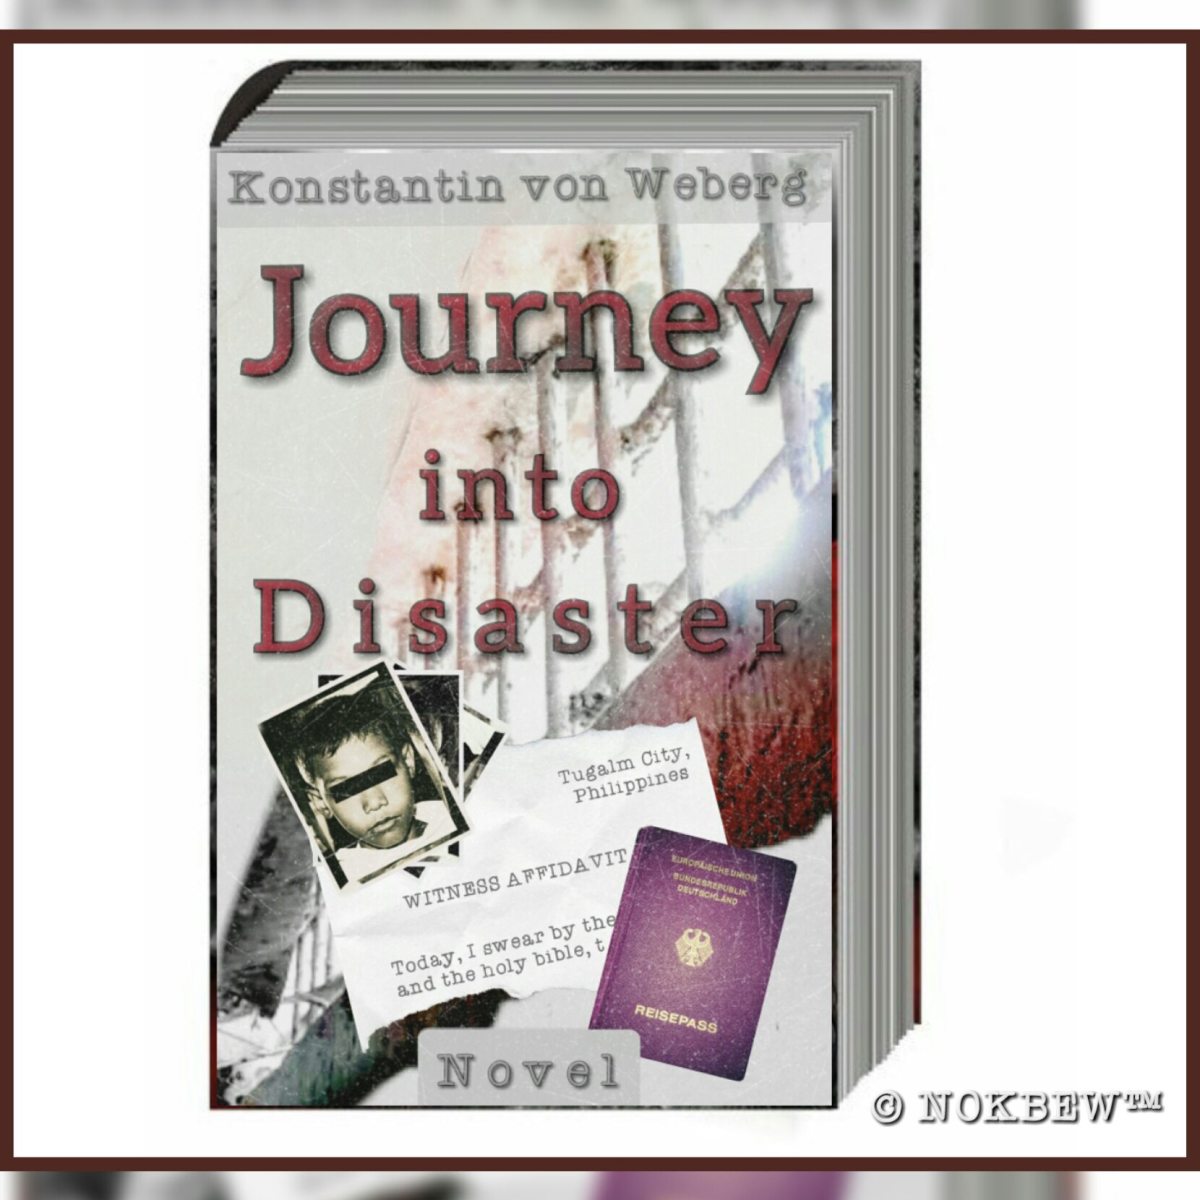 The Novel »Journey into Disaster« eBook Price promotion on Amazon!